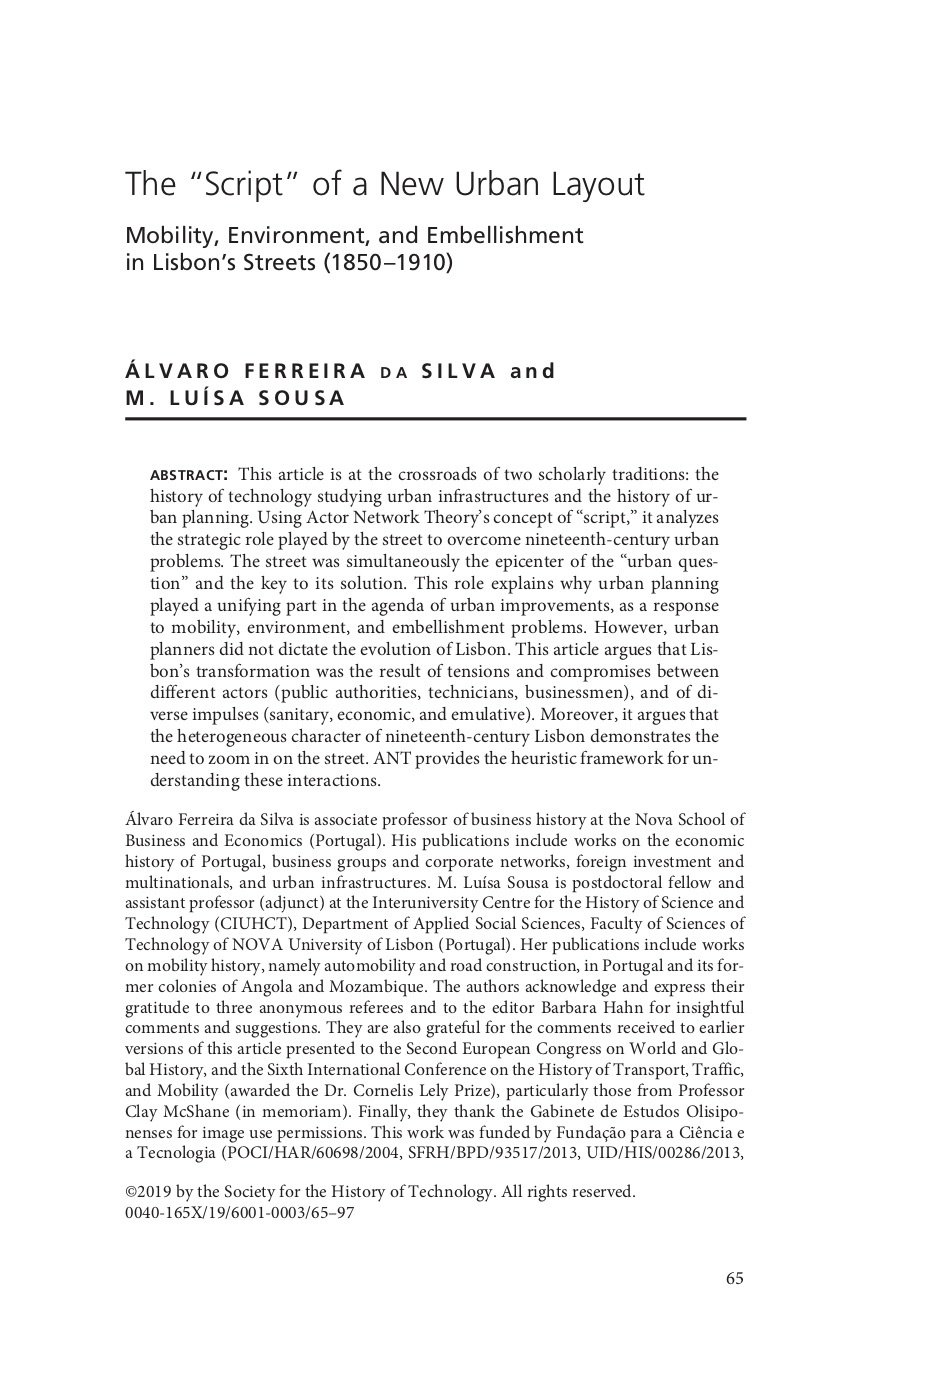 The “script” of a new urban layout: mobility, environment and embellishment in Lisbon’s streets (1850-1910), Capa